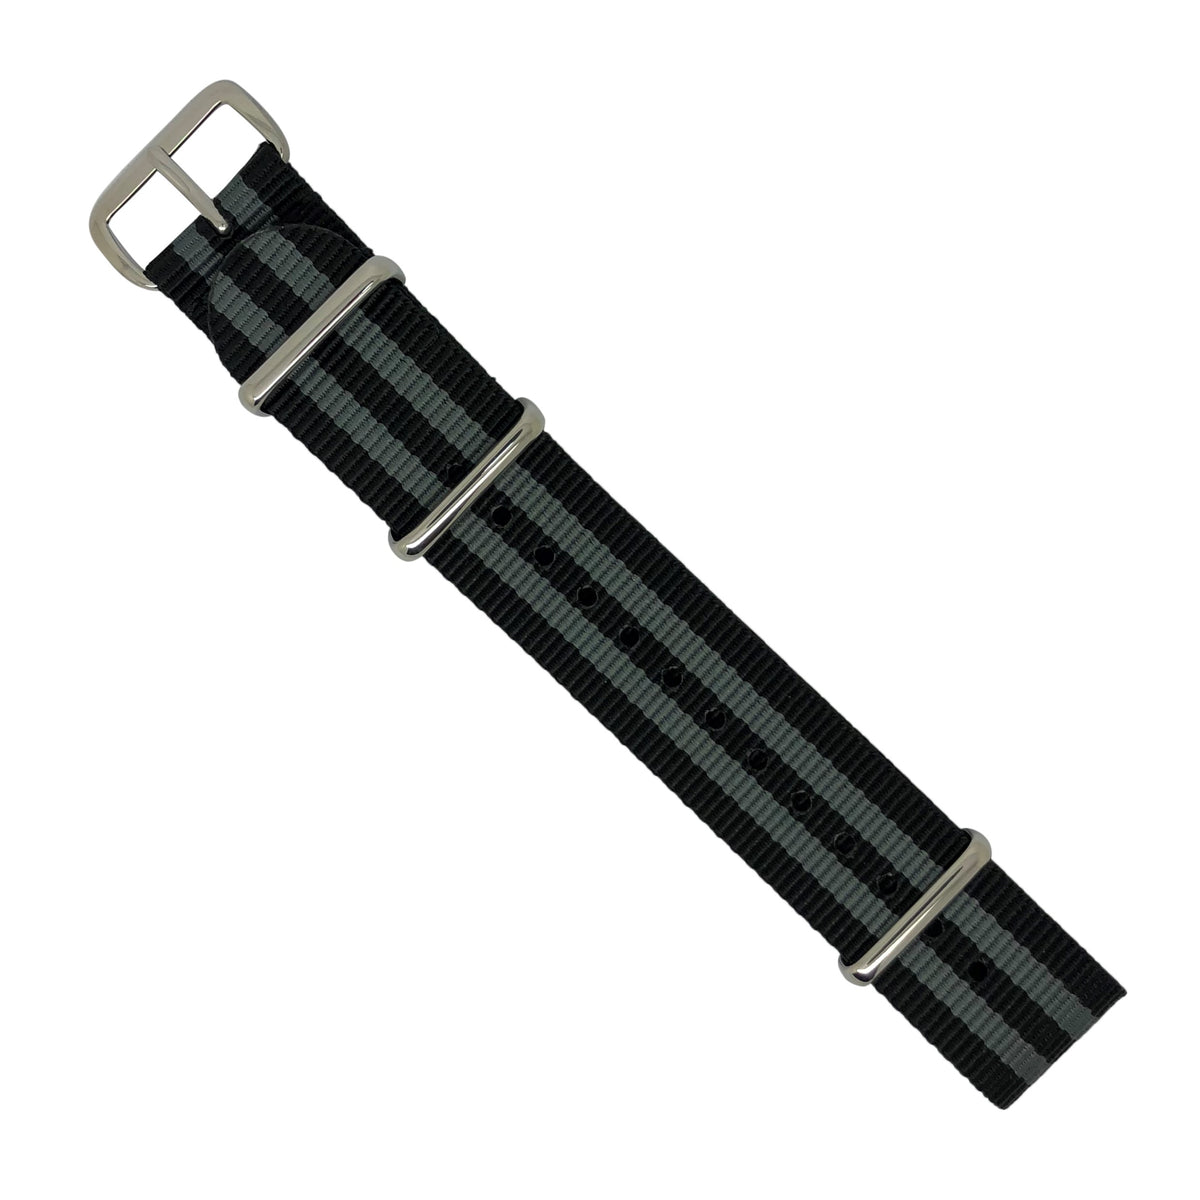 Premium Nato Strap in Black Grey (James Bond) with Polished Silver Buckle (18mm) - Nomad watch Works